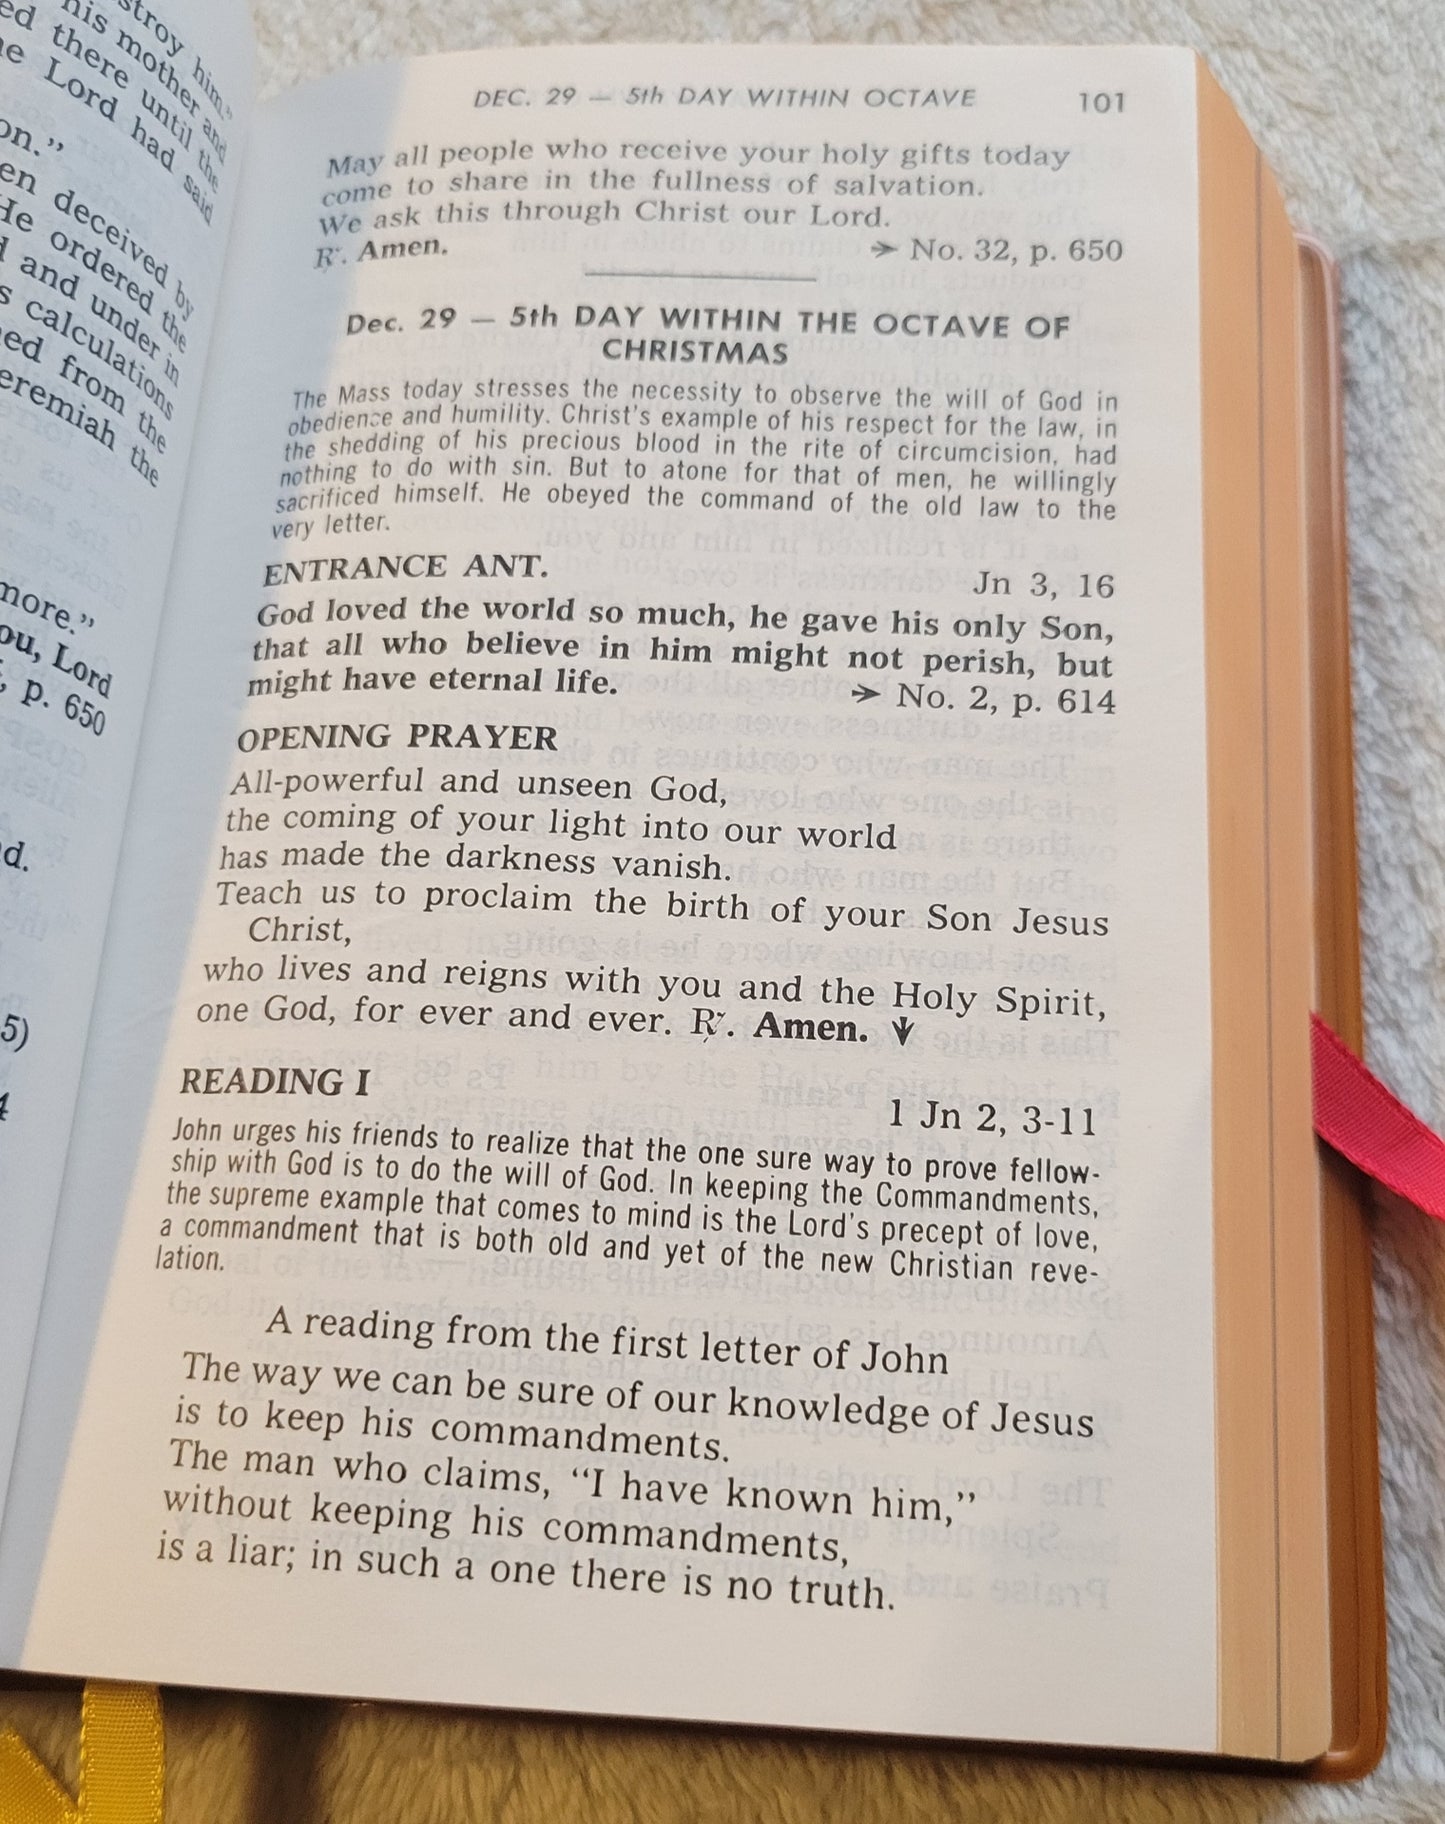 Vintage book for sale, "New....St. Joseph Weekday Missal Vol 1: Advent to Pentecost" Complete Edition, by the Catholic Book Publishing Company, "In accordance with Vatican II". View of page 101.